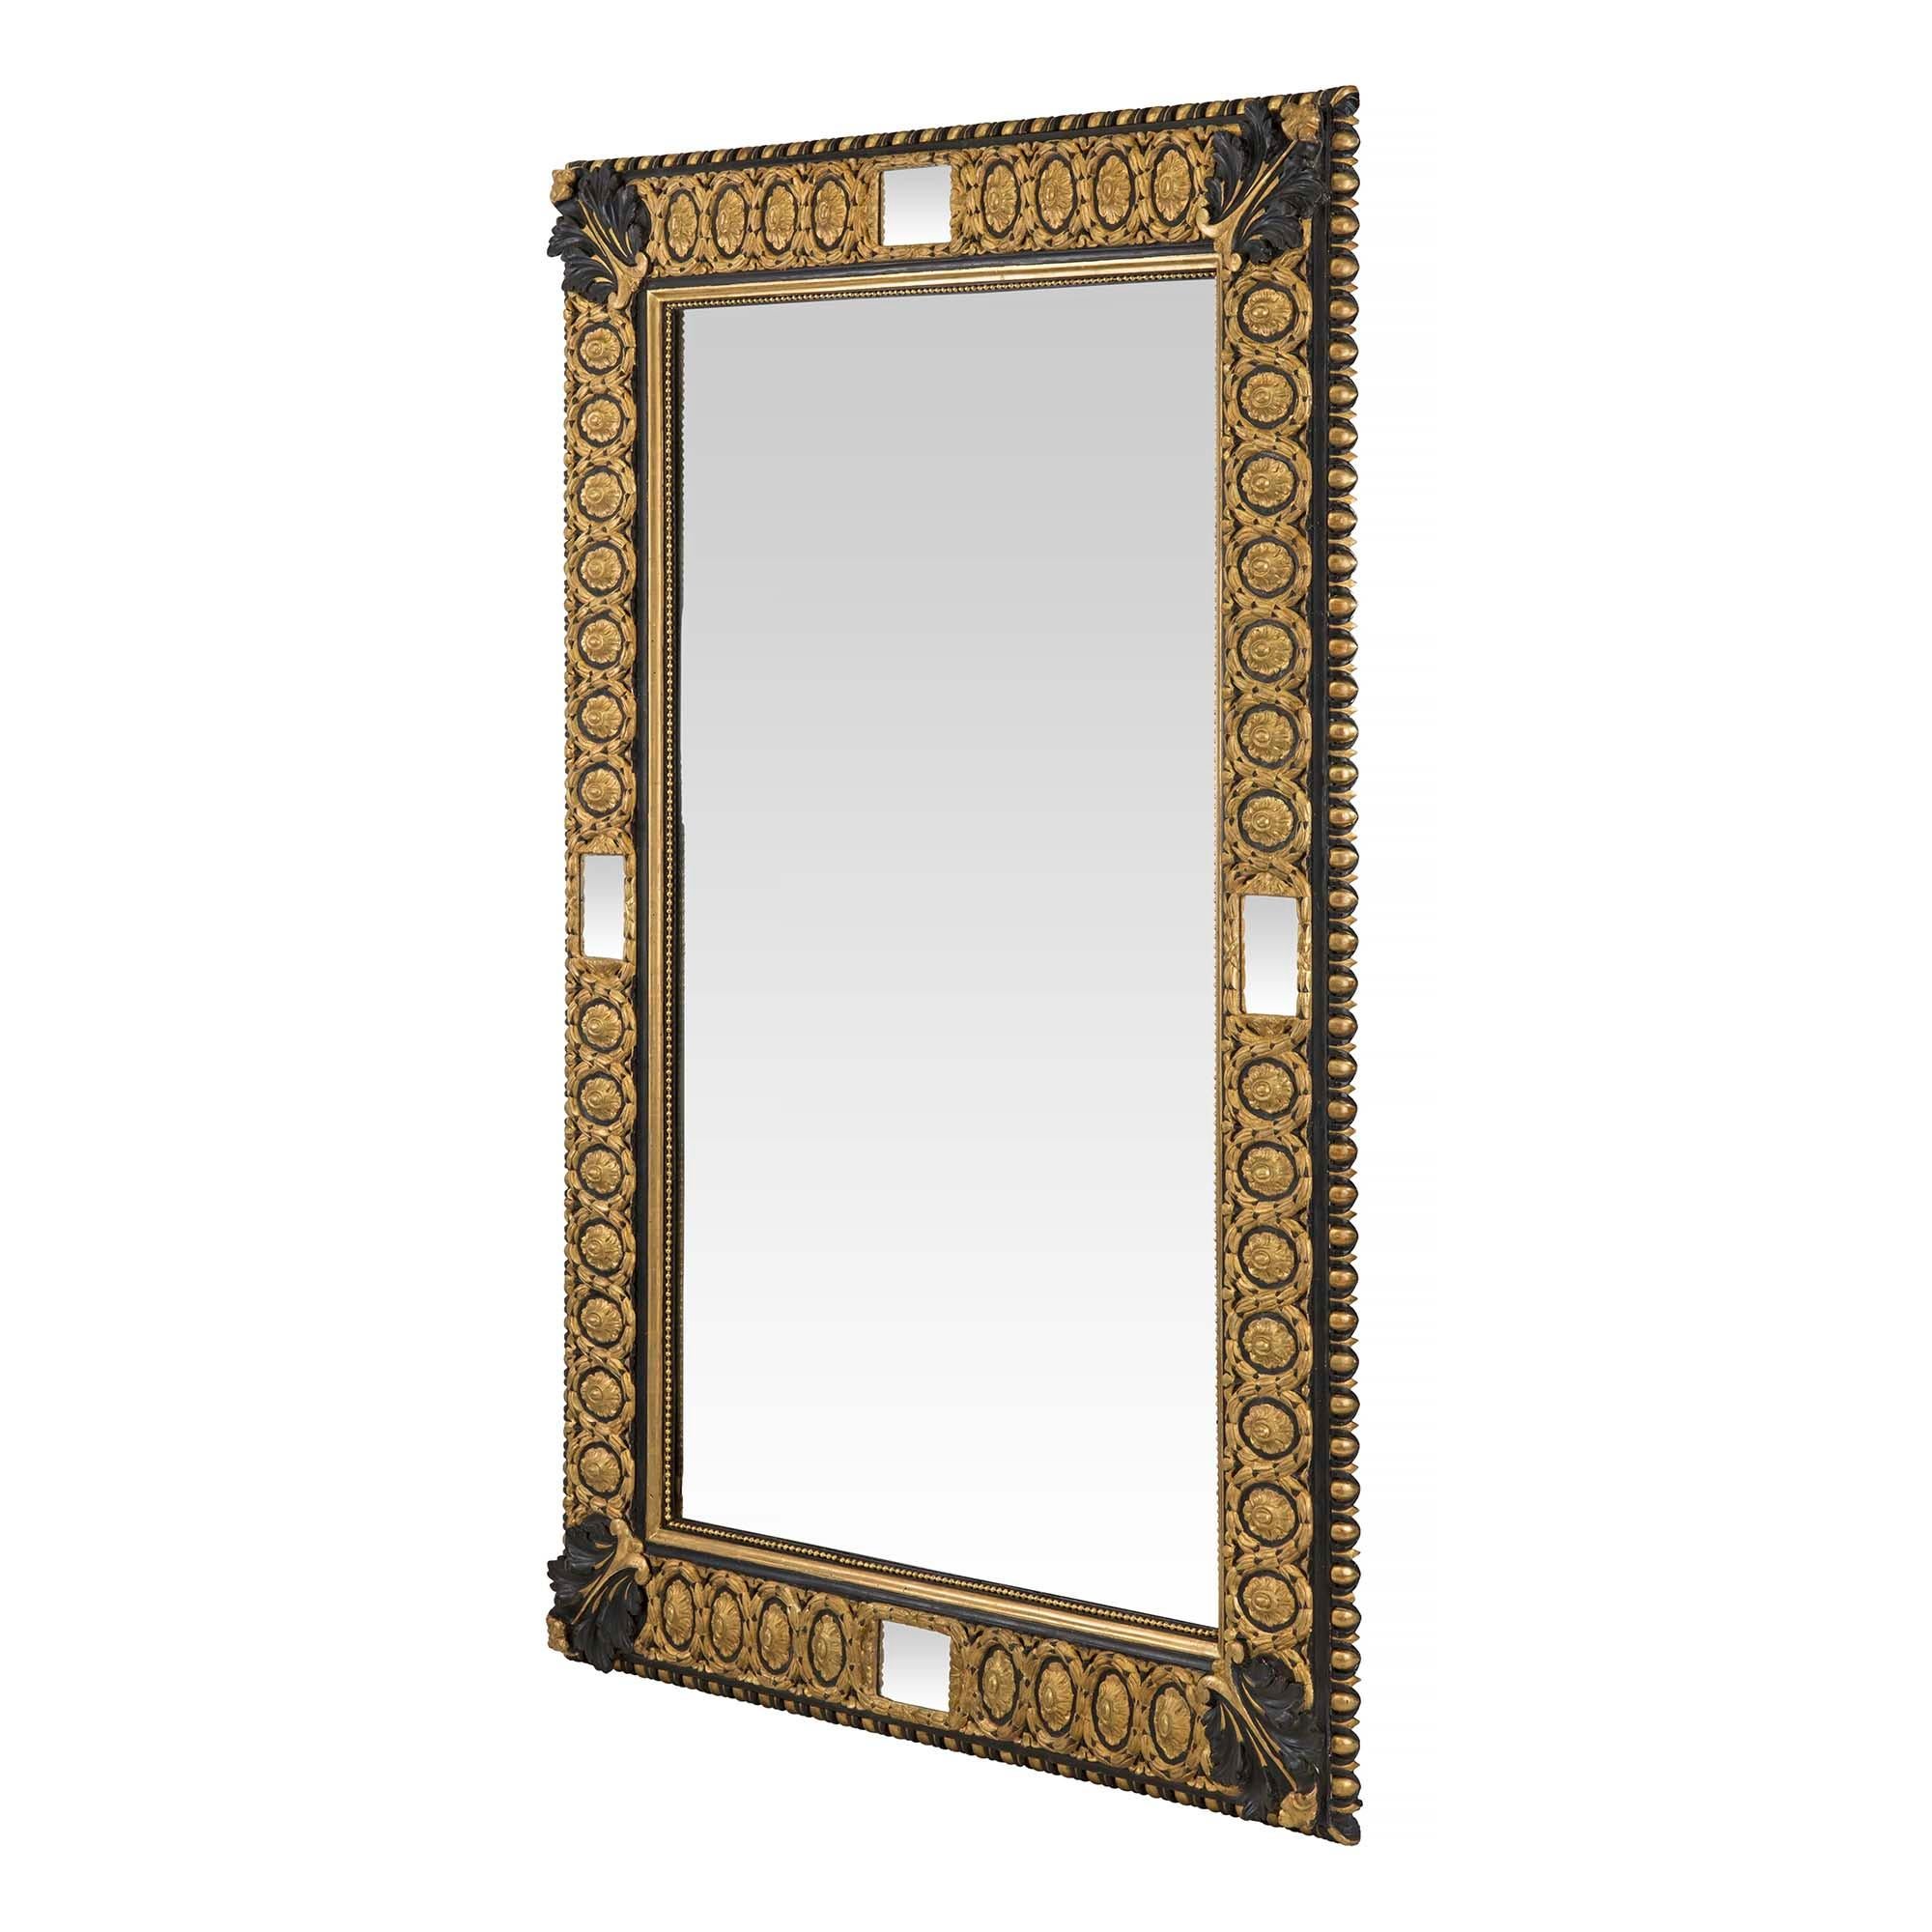 A very handsome Italian 19th century Louis XVI st. giltwood and black polychrome mirror. The rectangular mirror has a beaded interior trim with large oval running wave and rosette design. At the center of each side is a small mirror insert.